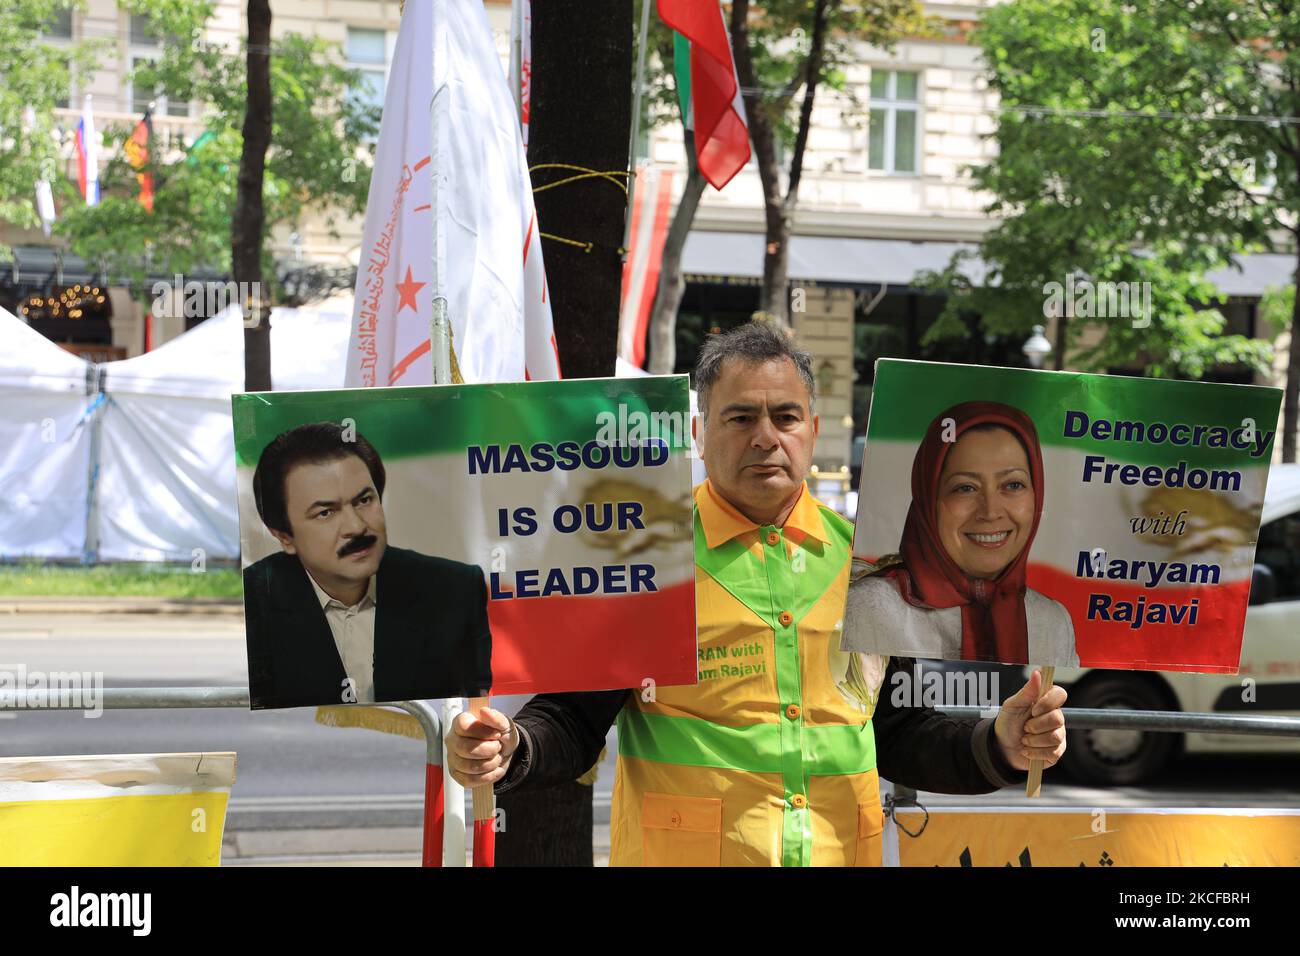 Simultaneous with the Iran Nuclear talks in Vienna, supporters of the Iranian opposition (NCRI), held a rally outside the Grand Hotel on Friday, May 28, 2021 in Vienna, Austria. The protesters called the world community to end appeasing the Iran regime, hold its leaders accountable for violating human rights and spending the Iranian people's wealth on the nuclear weapons program. (Photo by Siavosh Hosseini/NurPhoto) Stock Photo